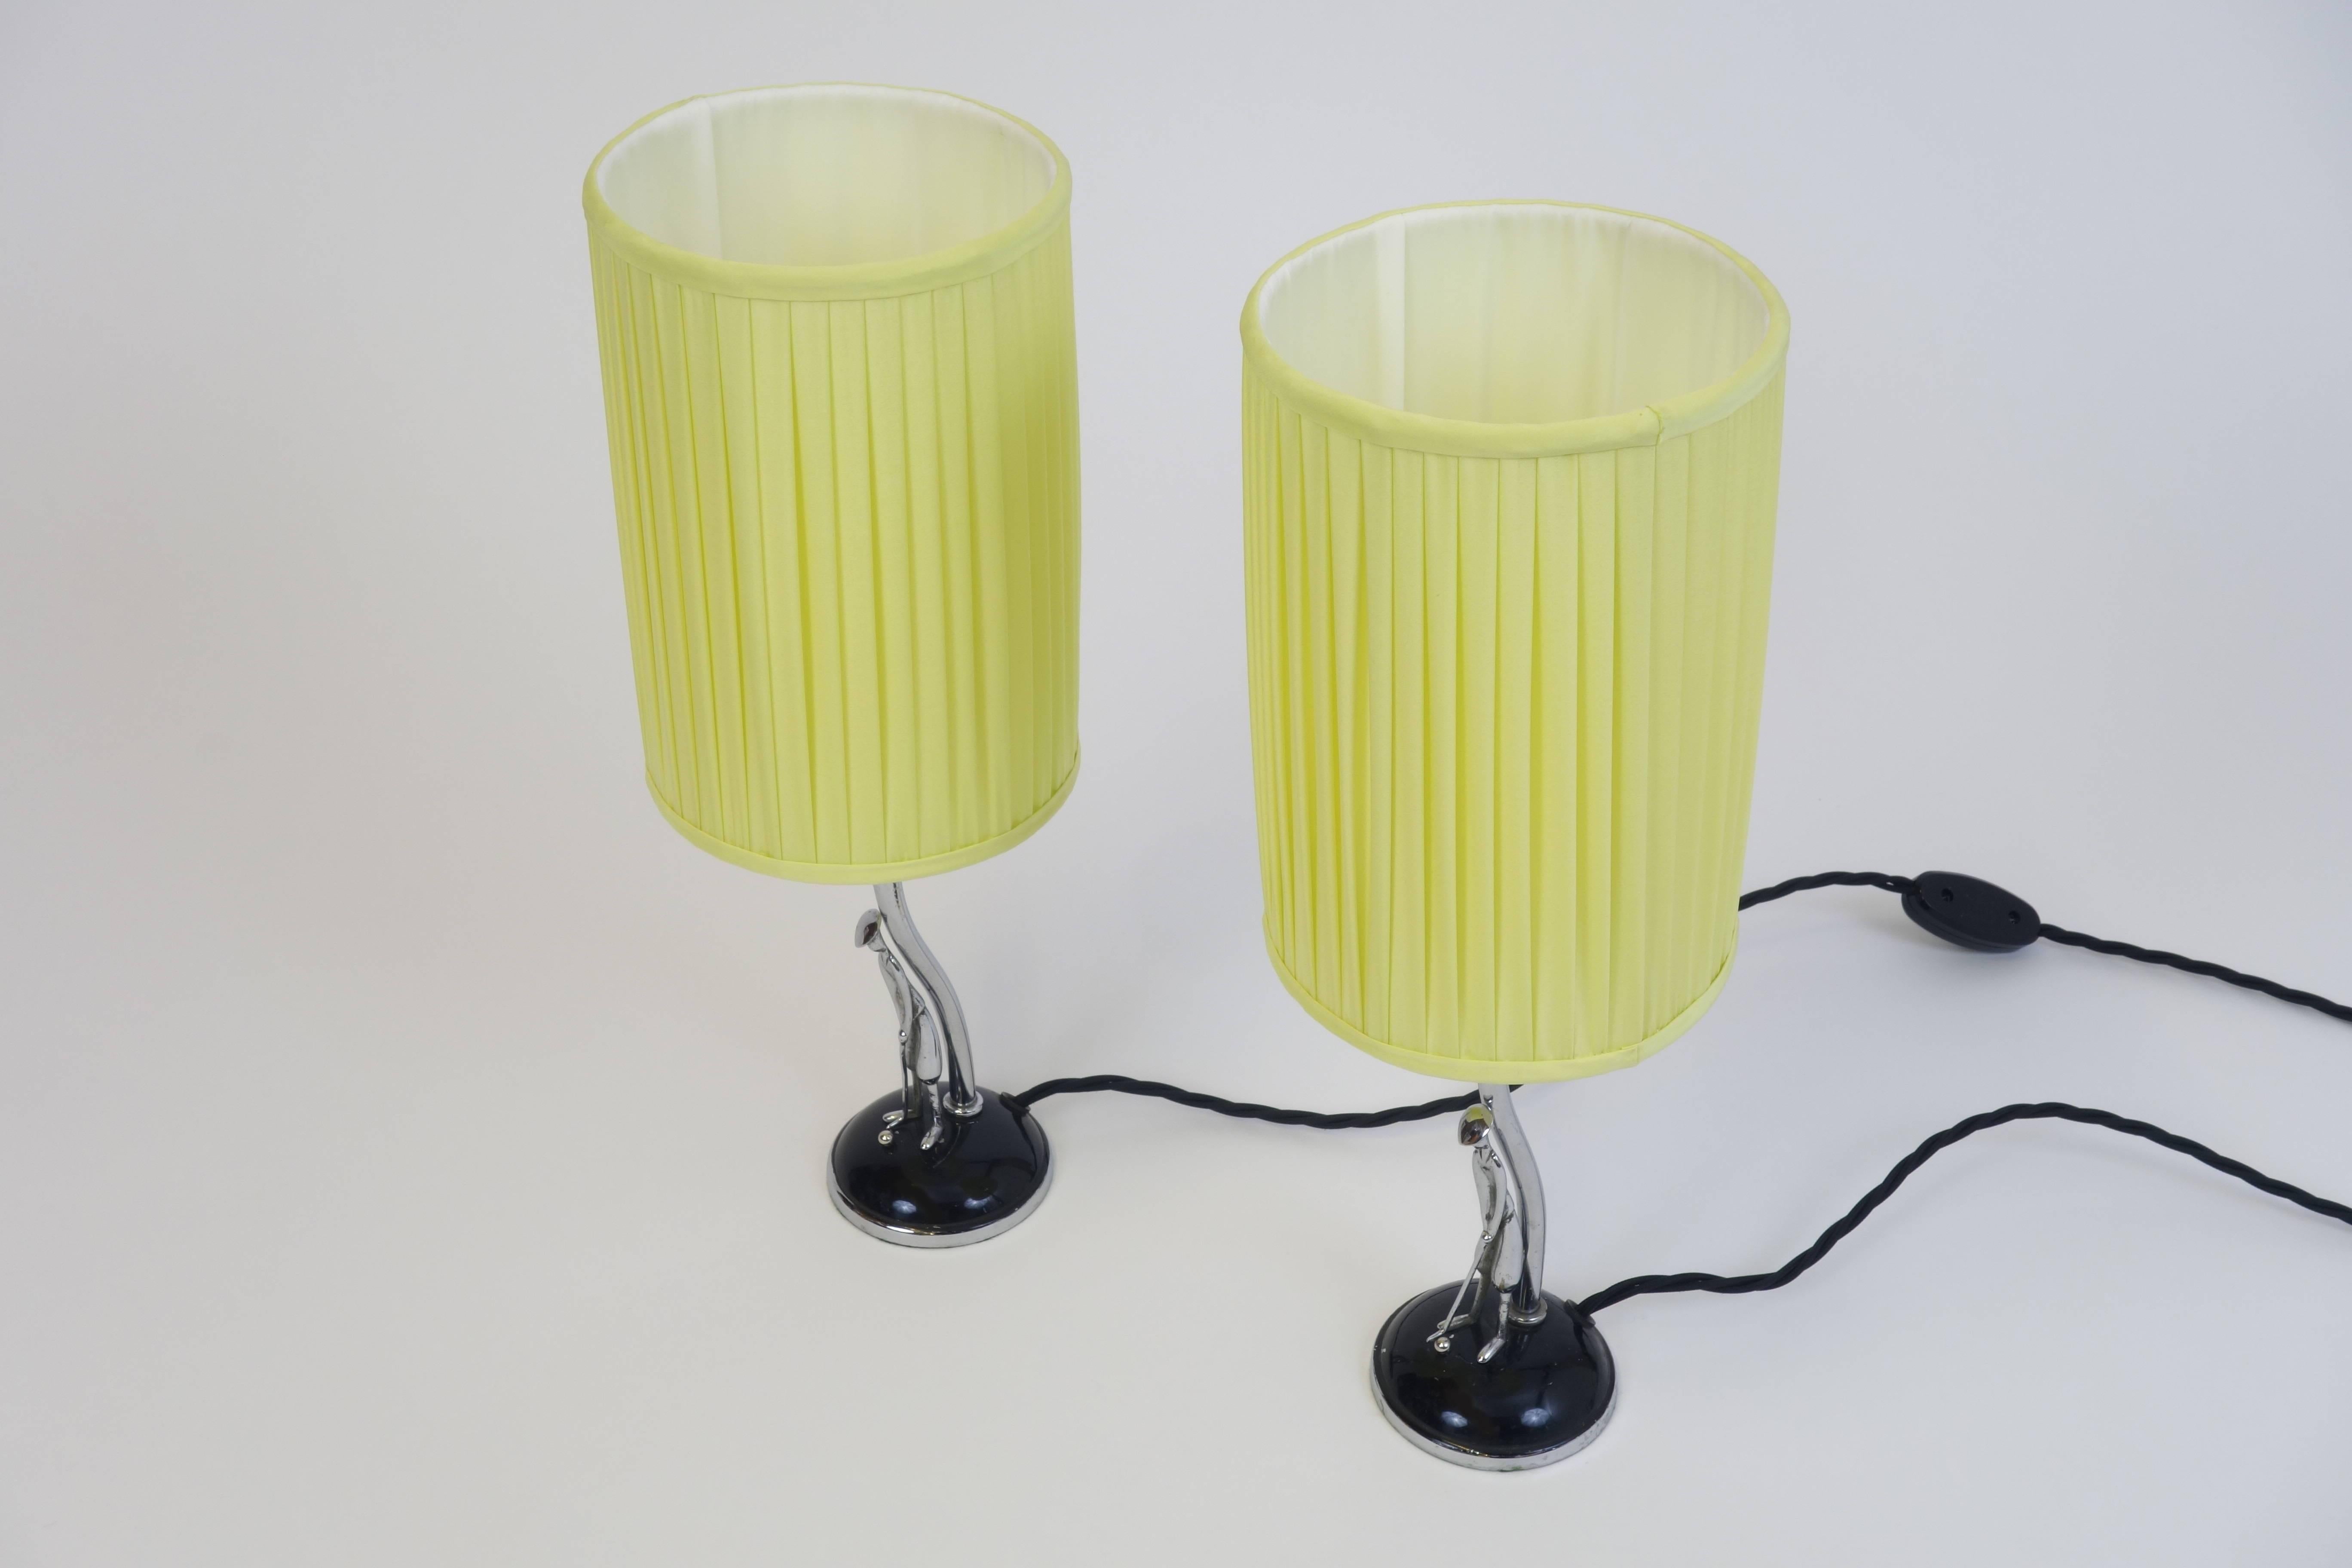 Plated Hagenauer Table Lamps, Sculptured Nickel Stands with Yellow Lampshades For Sale